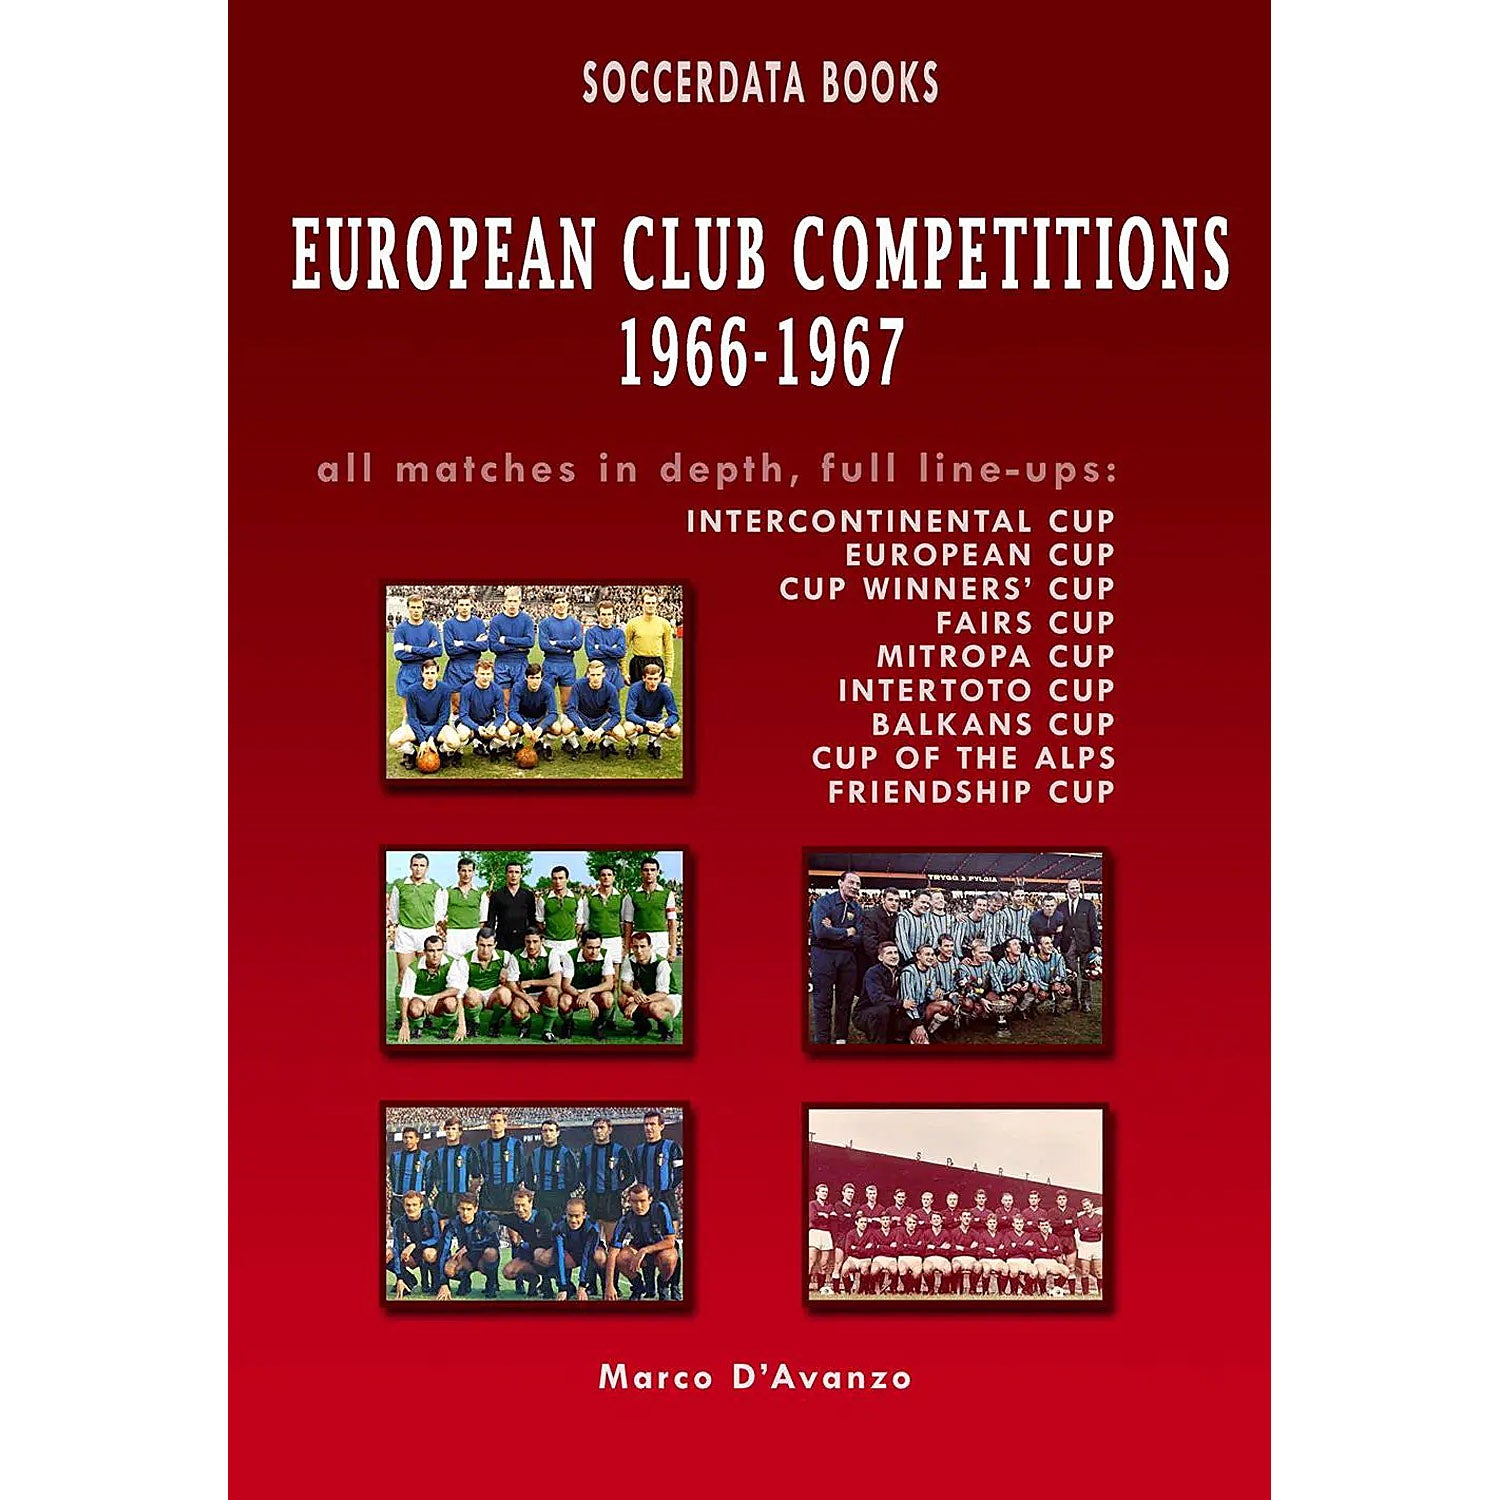 European Club Competitions 1966-1967